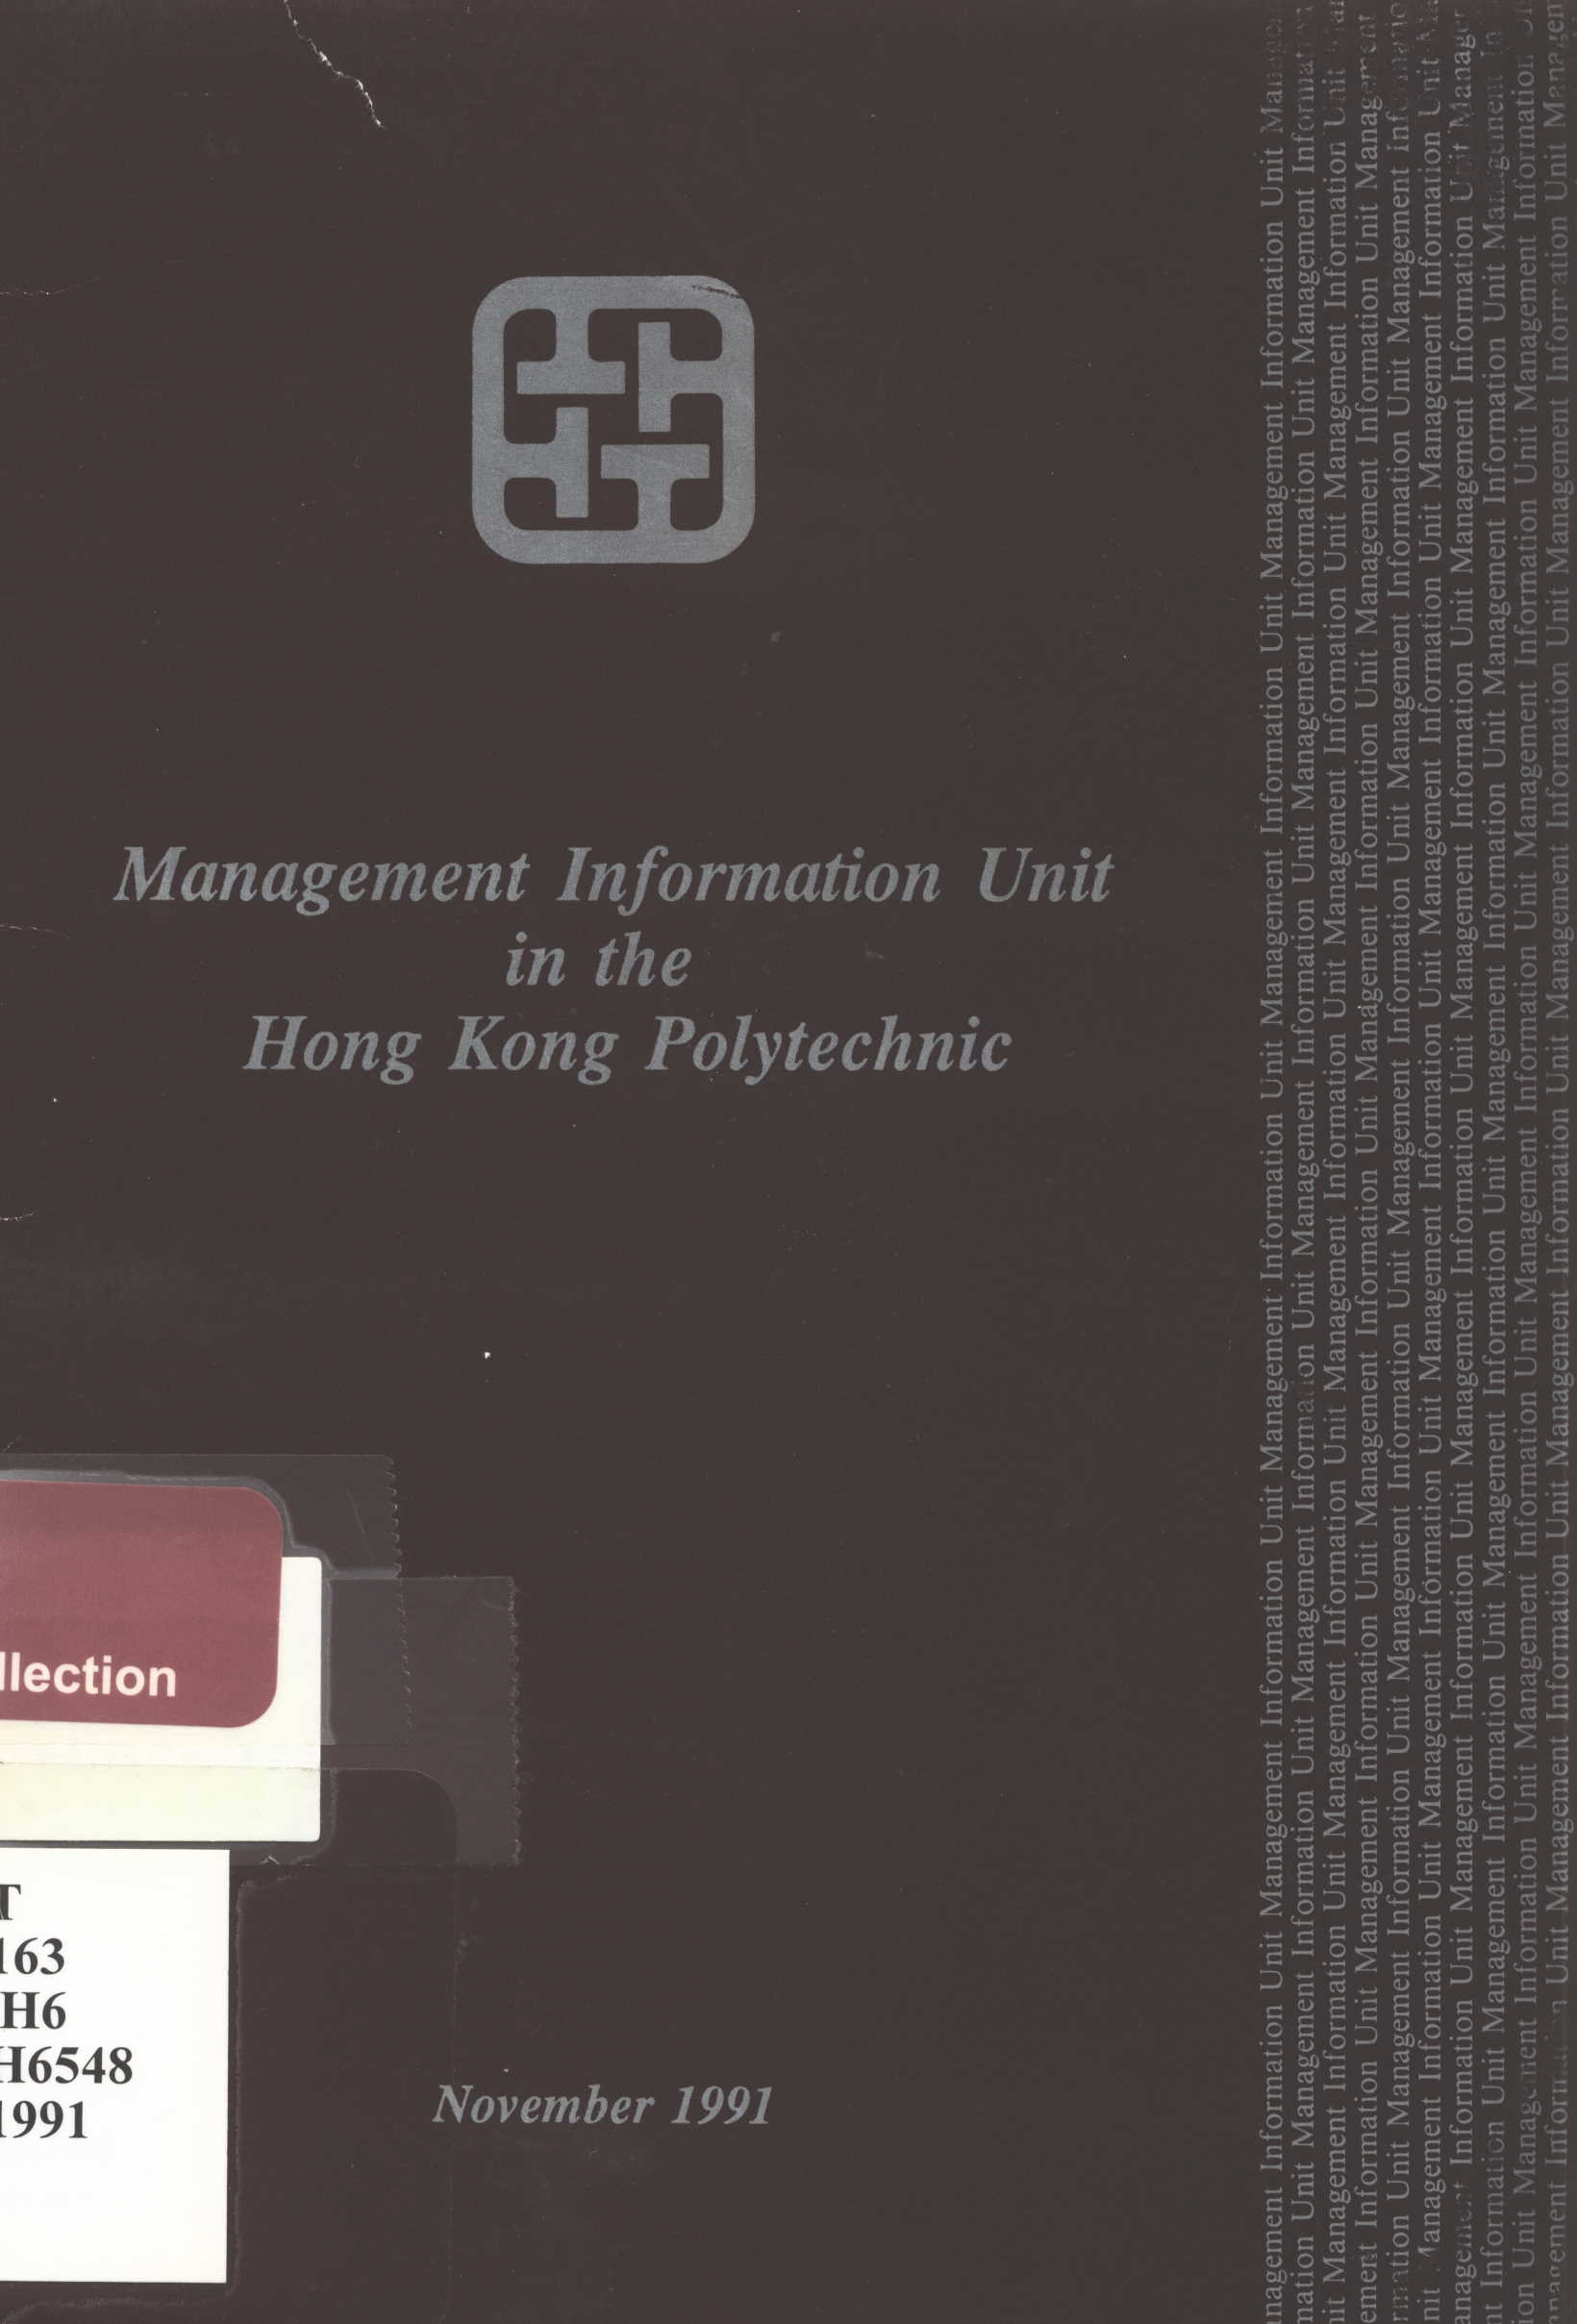 Management Information Unit in the Hong Kong Polytechnic 1991